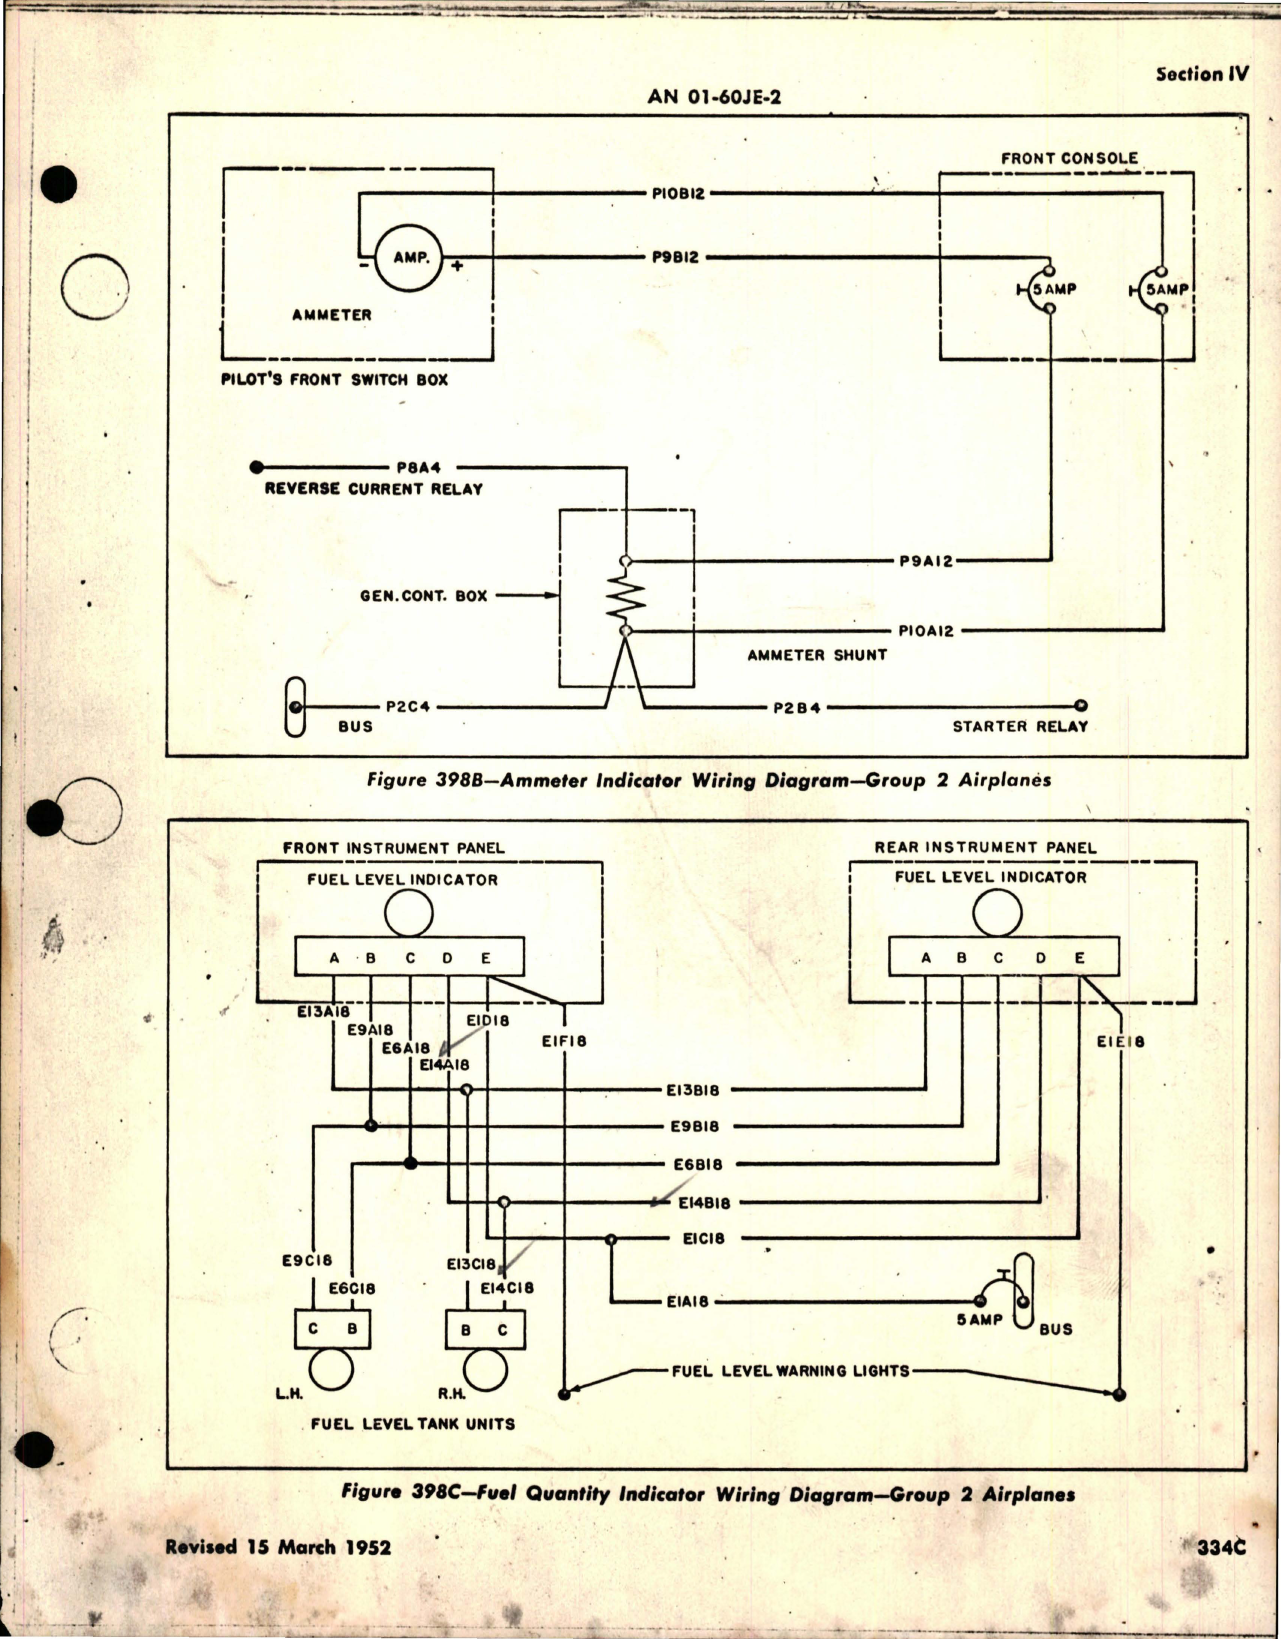 Sample page 5 from AirCorps Library document: Erection and Maintenance Instructions for P-51D, P-51K and P-51M - Wiring